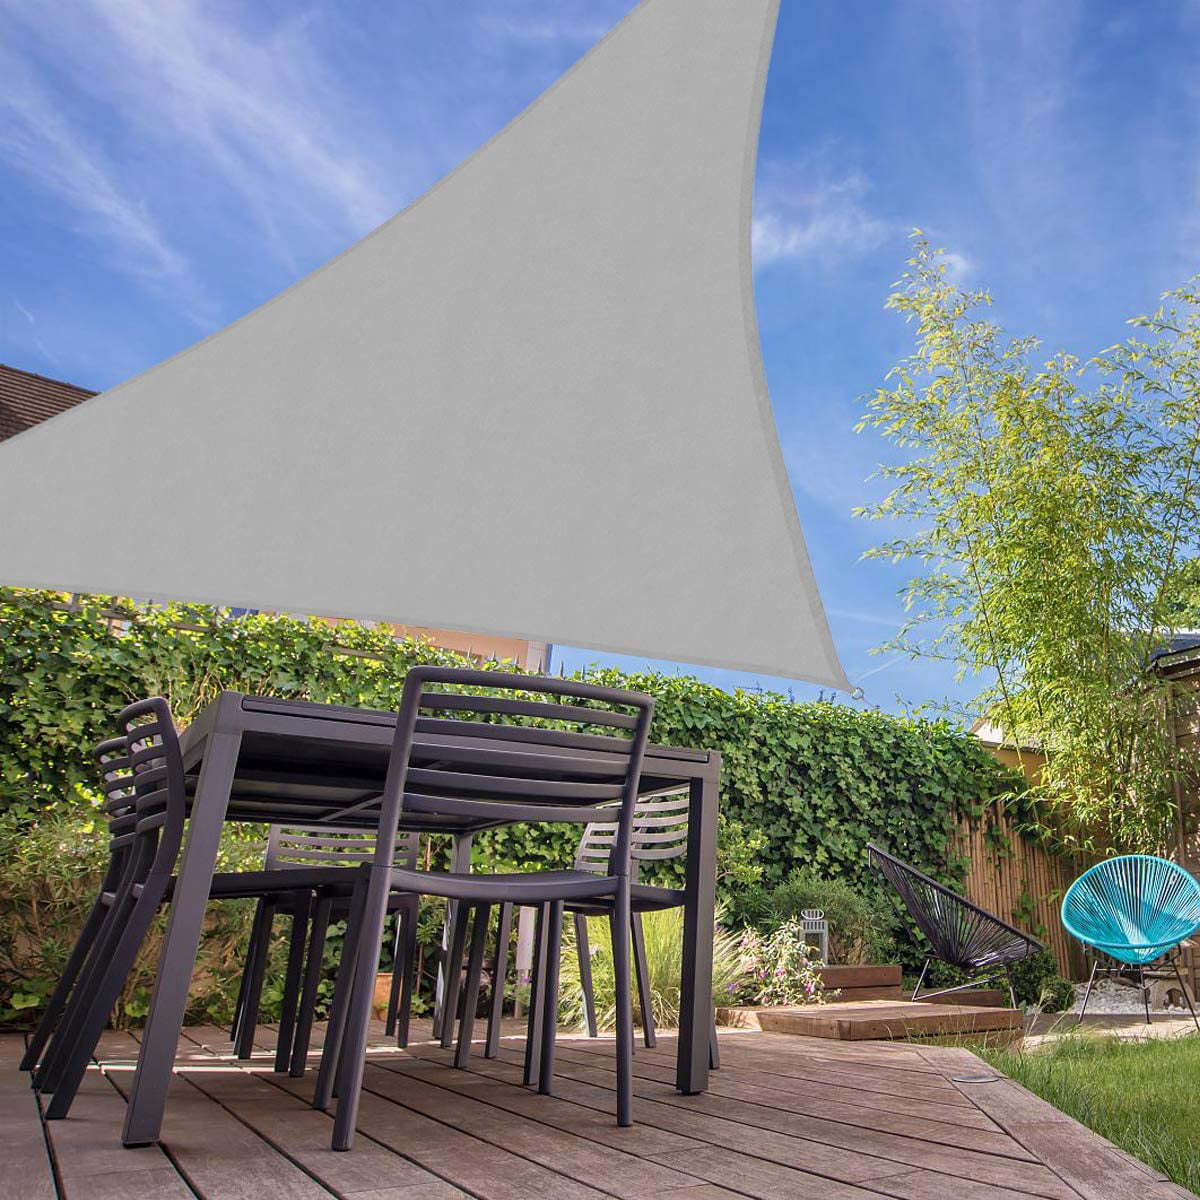 Details about   Outdoor Shade Sail Patio Suncreen Awning Garden Sun Canopy UV Block Triangle UK 